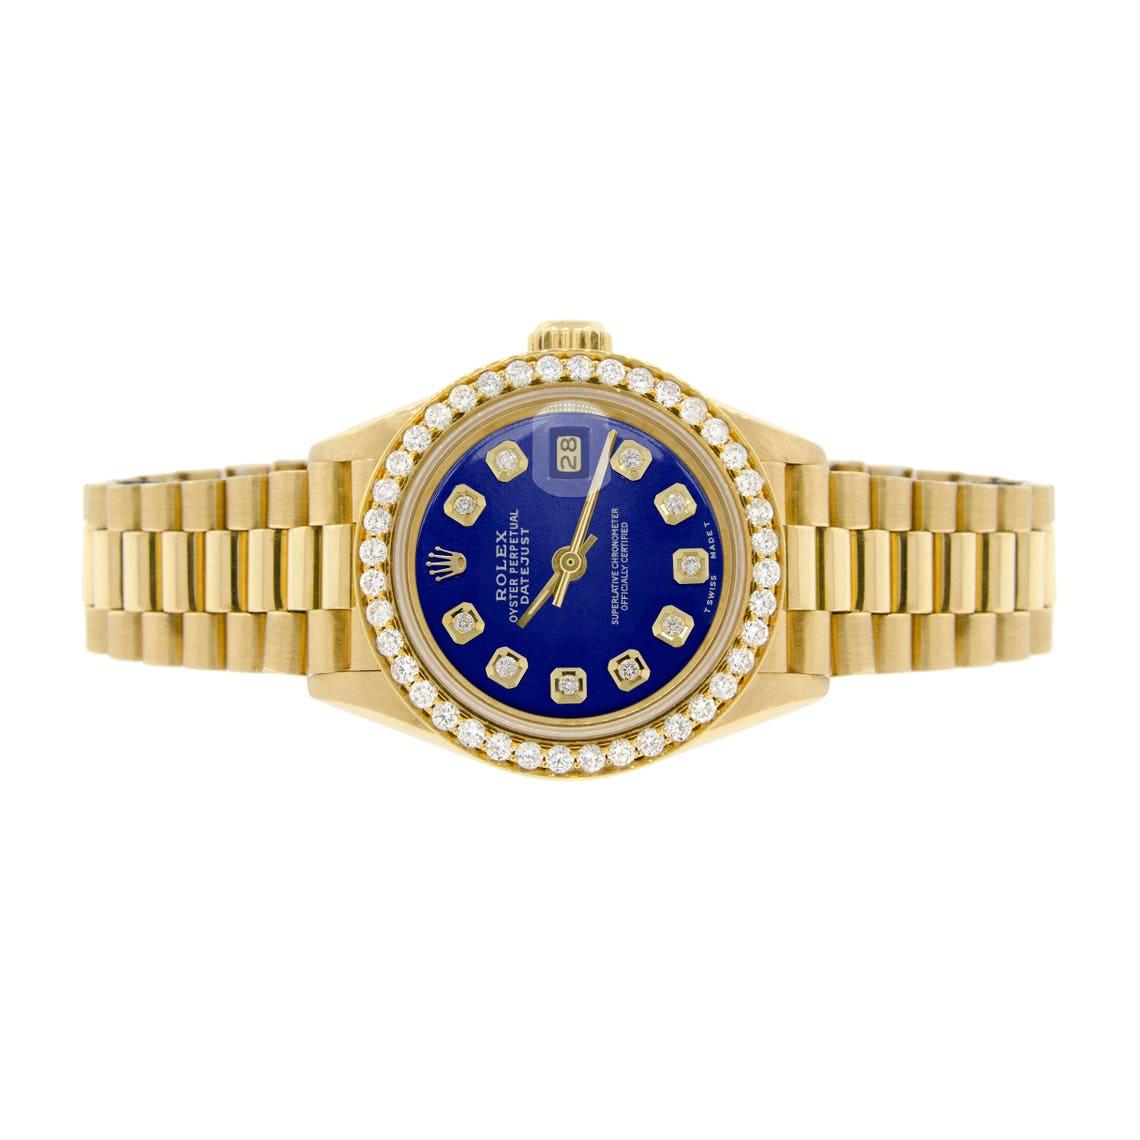 Rolex President Datejust Ladies Gold 26mm Watch Royal Blue Dial & Diamond Bezel  with 58 Diamonds set in 18 Karat Yellow Gold

This custom Rolex sure does stand out in the Royal Blue Colour  wit diamonds on the dial too.  Its jut the one  available 